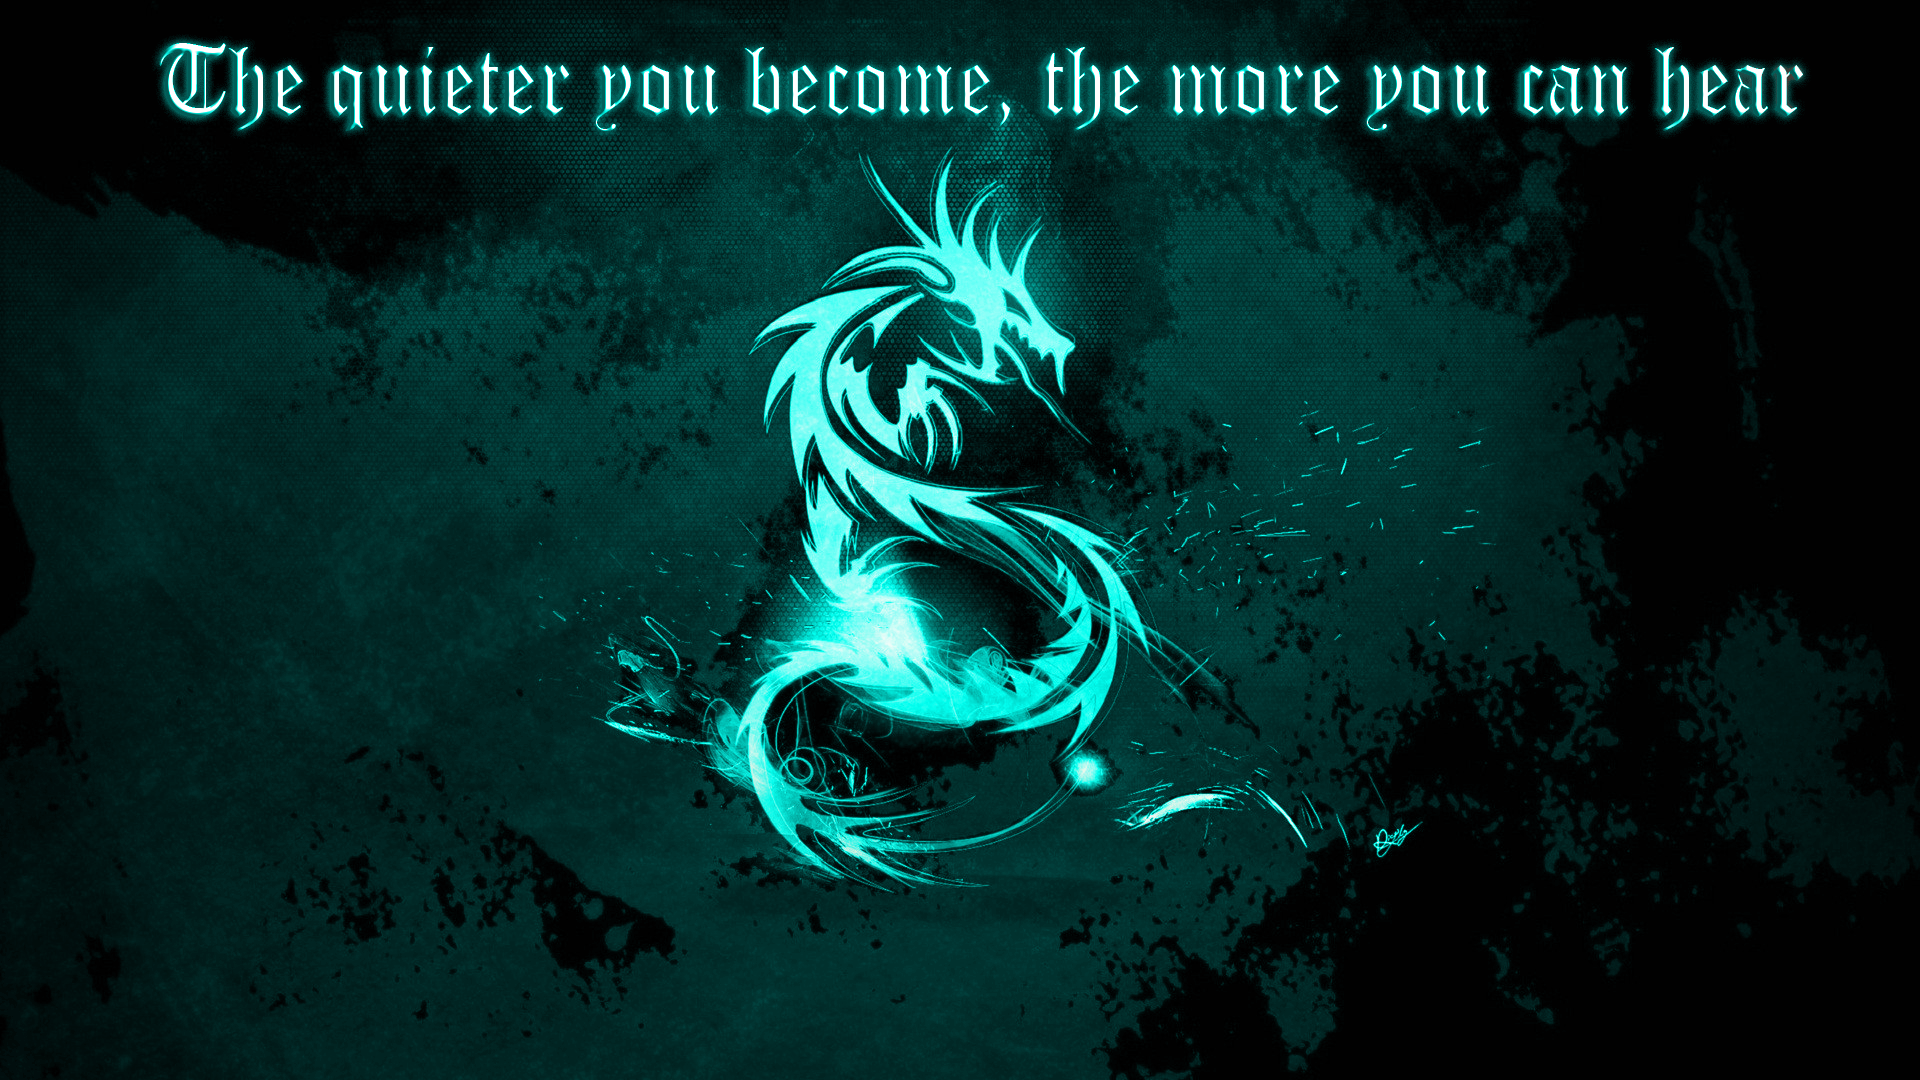 General 1920x1080 dragon quote Kali Linux NetHunter hacking abstract typography